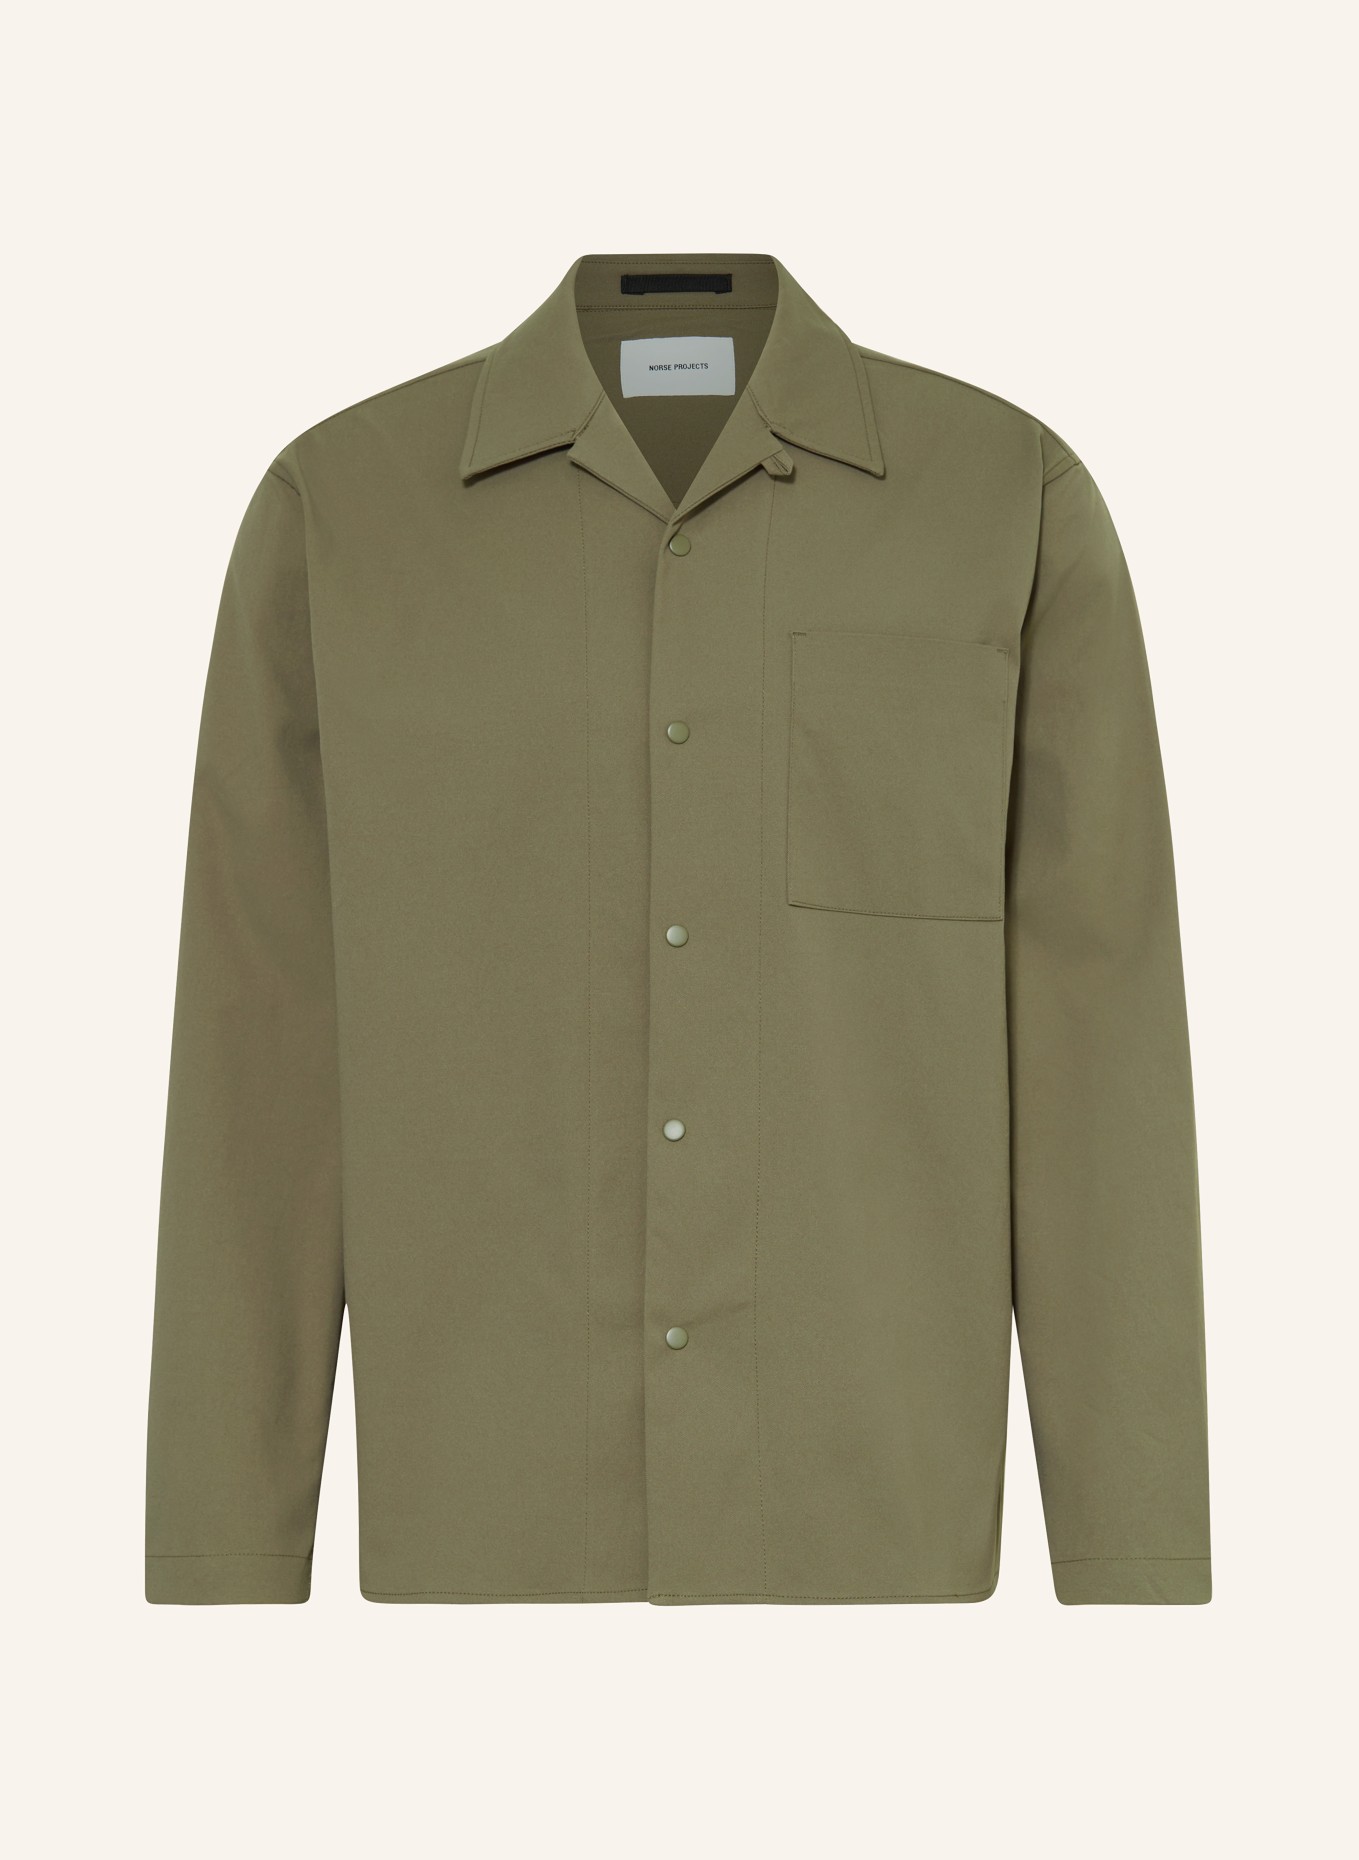 NORSE PROJECTS Overshirt CARSTEN, Farbe: OLIV (Bild 1)